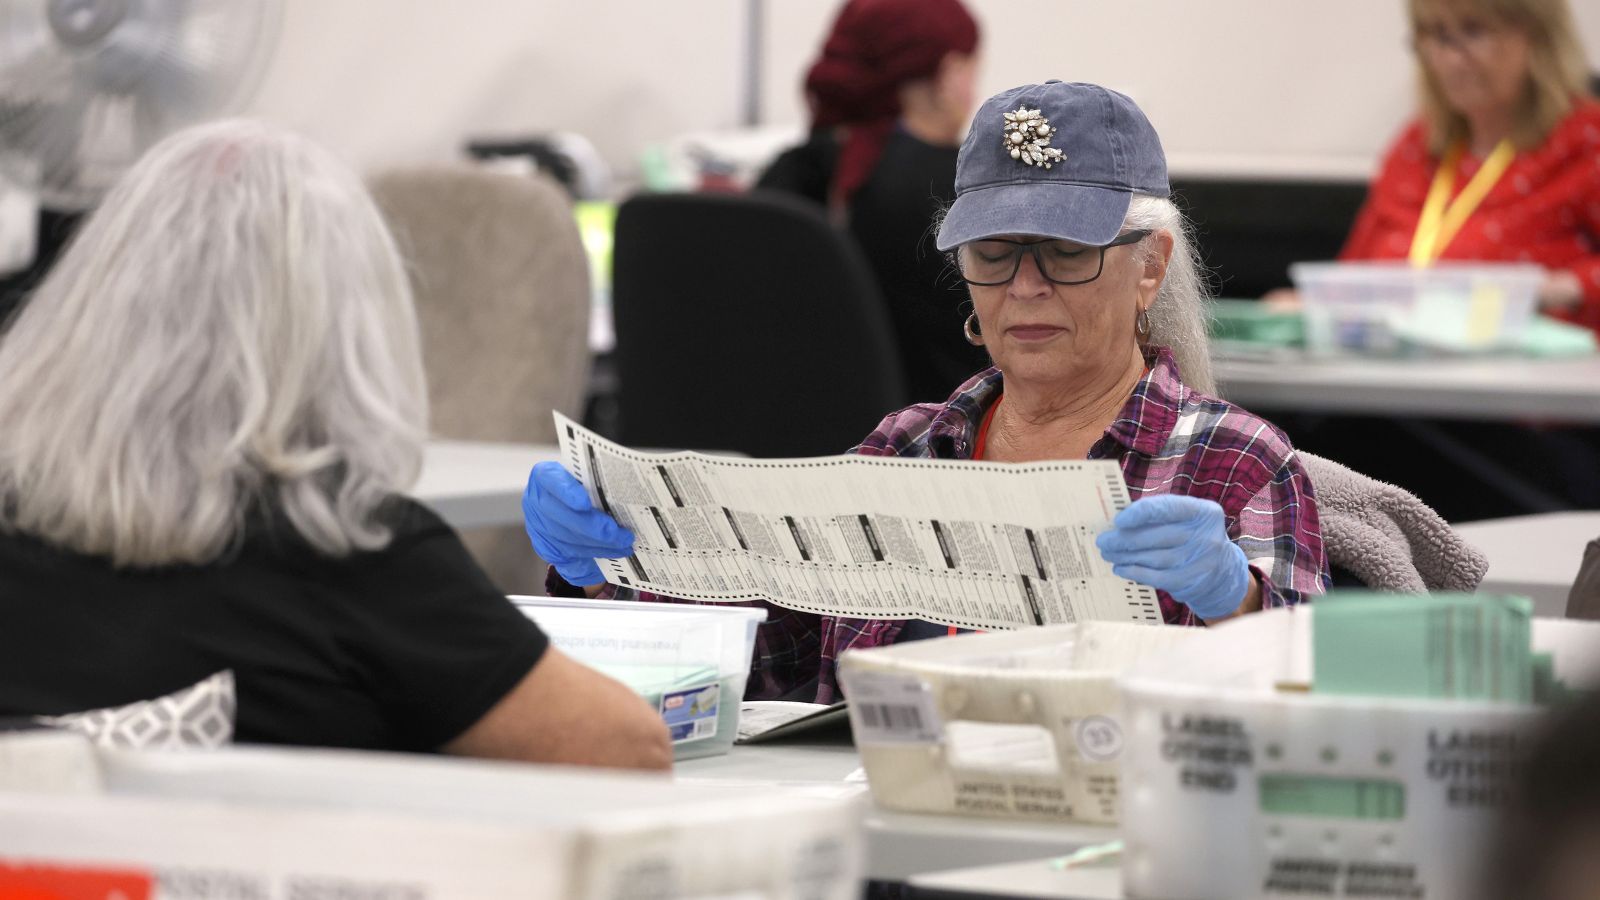 Temporary poll workers needed: 1,500 jobs in Maricopa County...